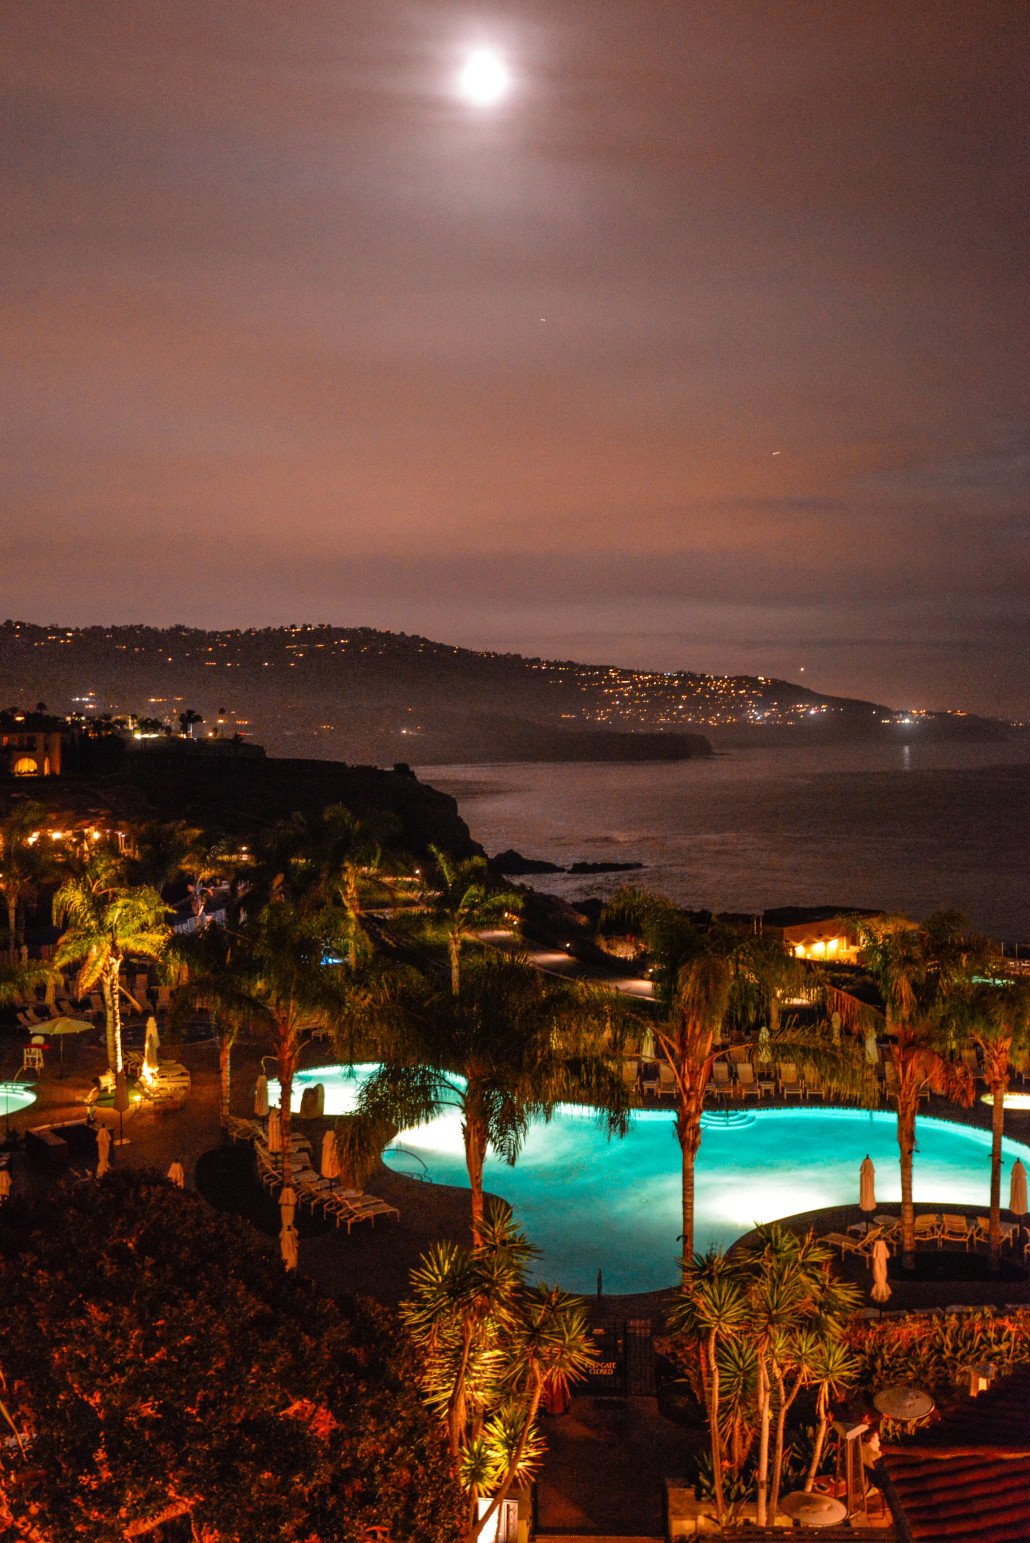 Moonlight over Palos Verdes: the evening view from my room at Terranea